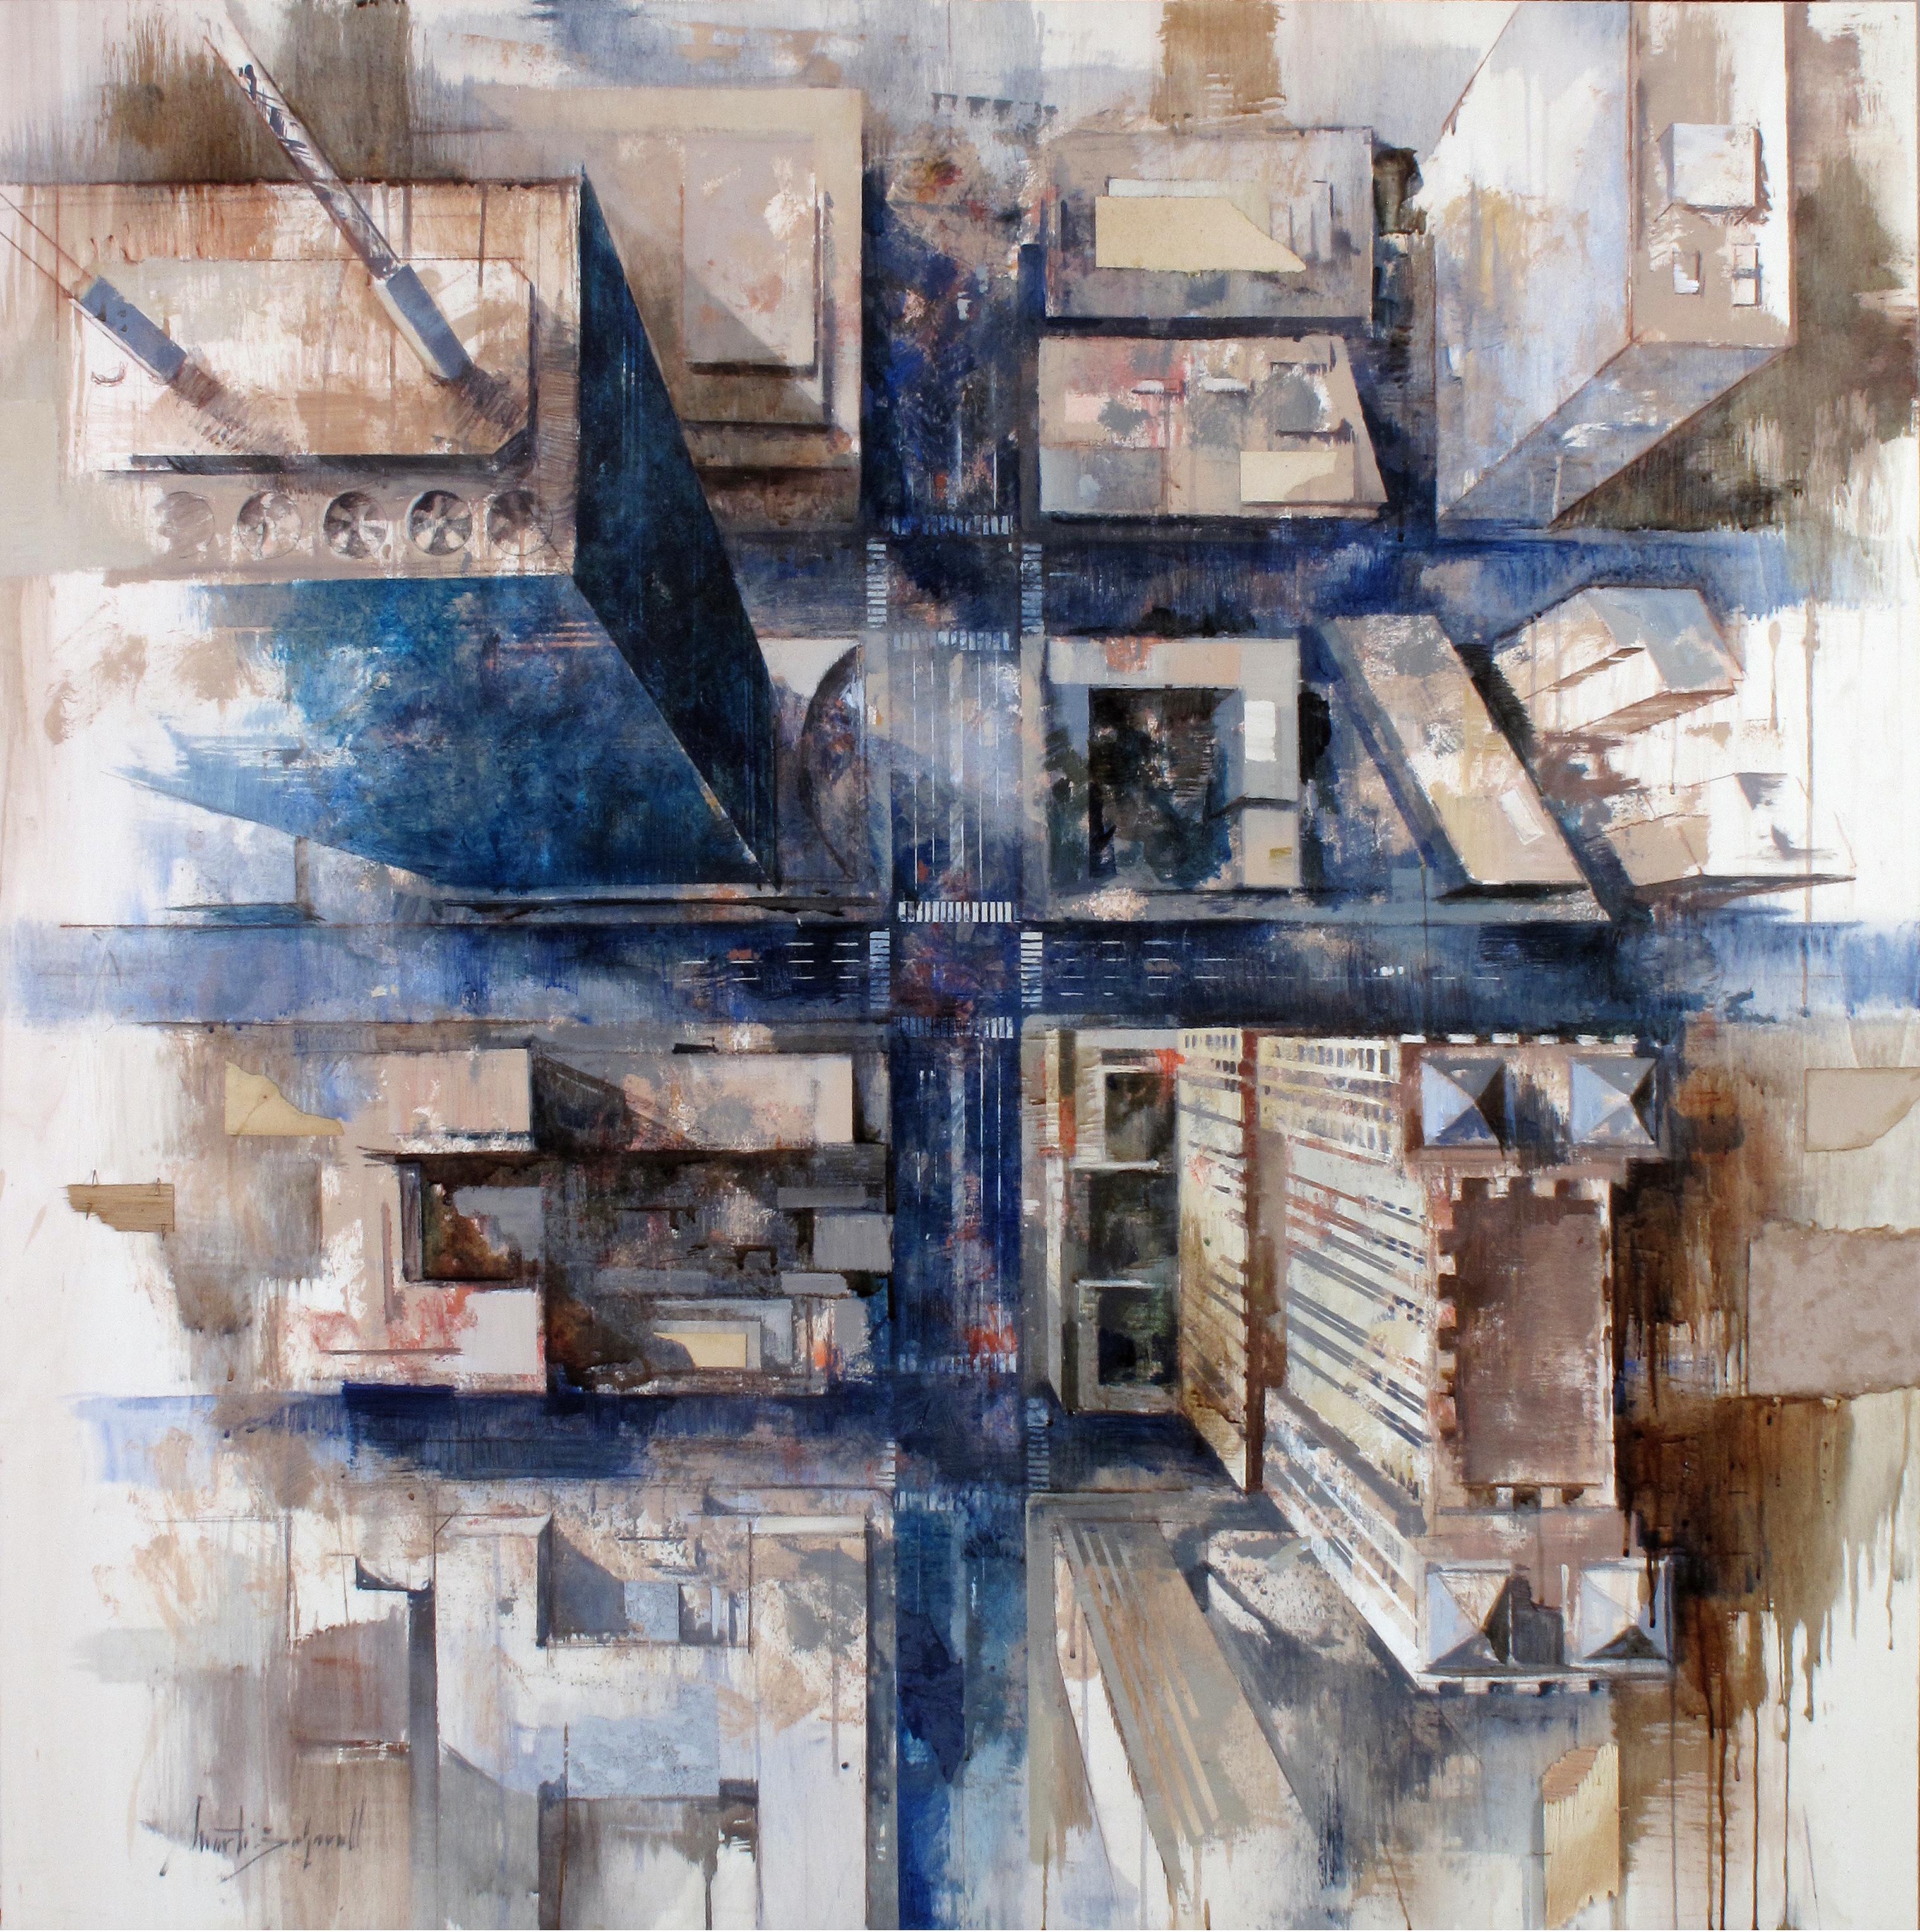 "Martí Bofarull’s work fits in with renovation of the urban landscape that has characterized Catalan painting of the last twenty years. Among our artists who have remained loyal to figurative techniques, several have successfully fixed their gaze on